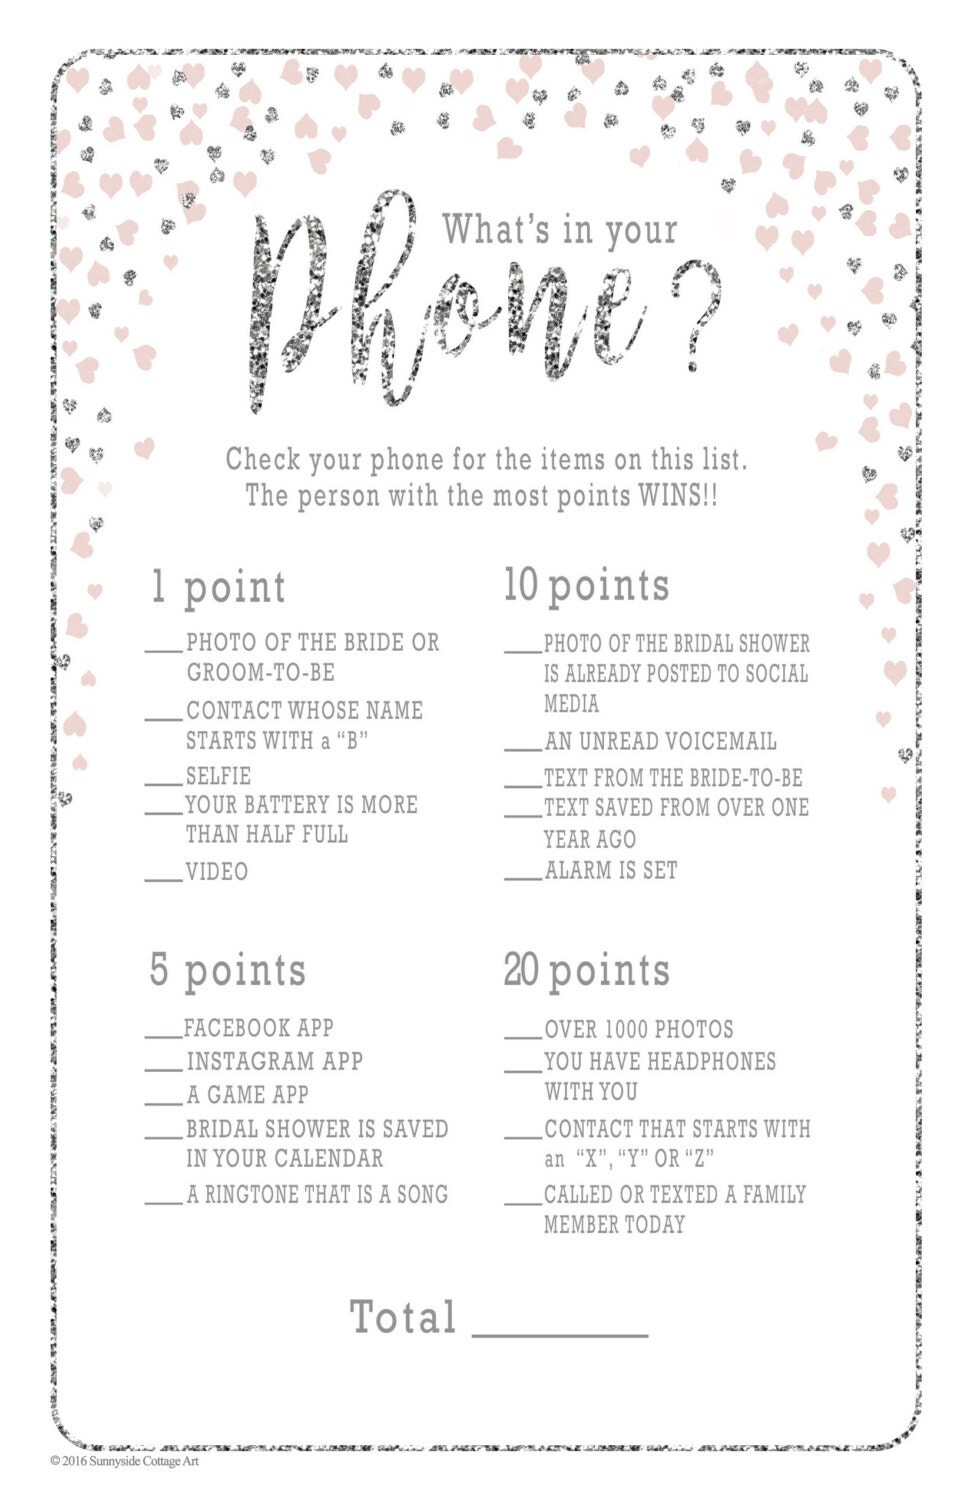 What's in Your Phone bridal shower game by SunnysideCottageArt